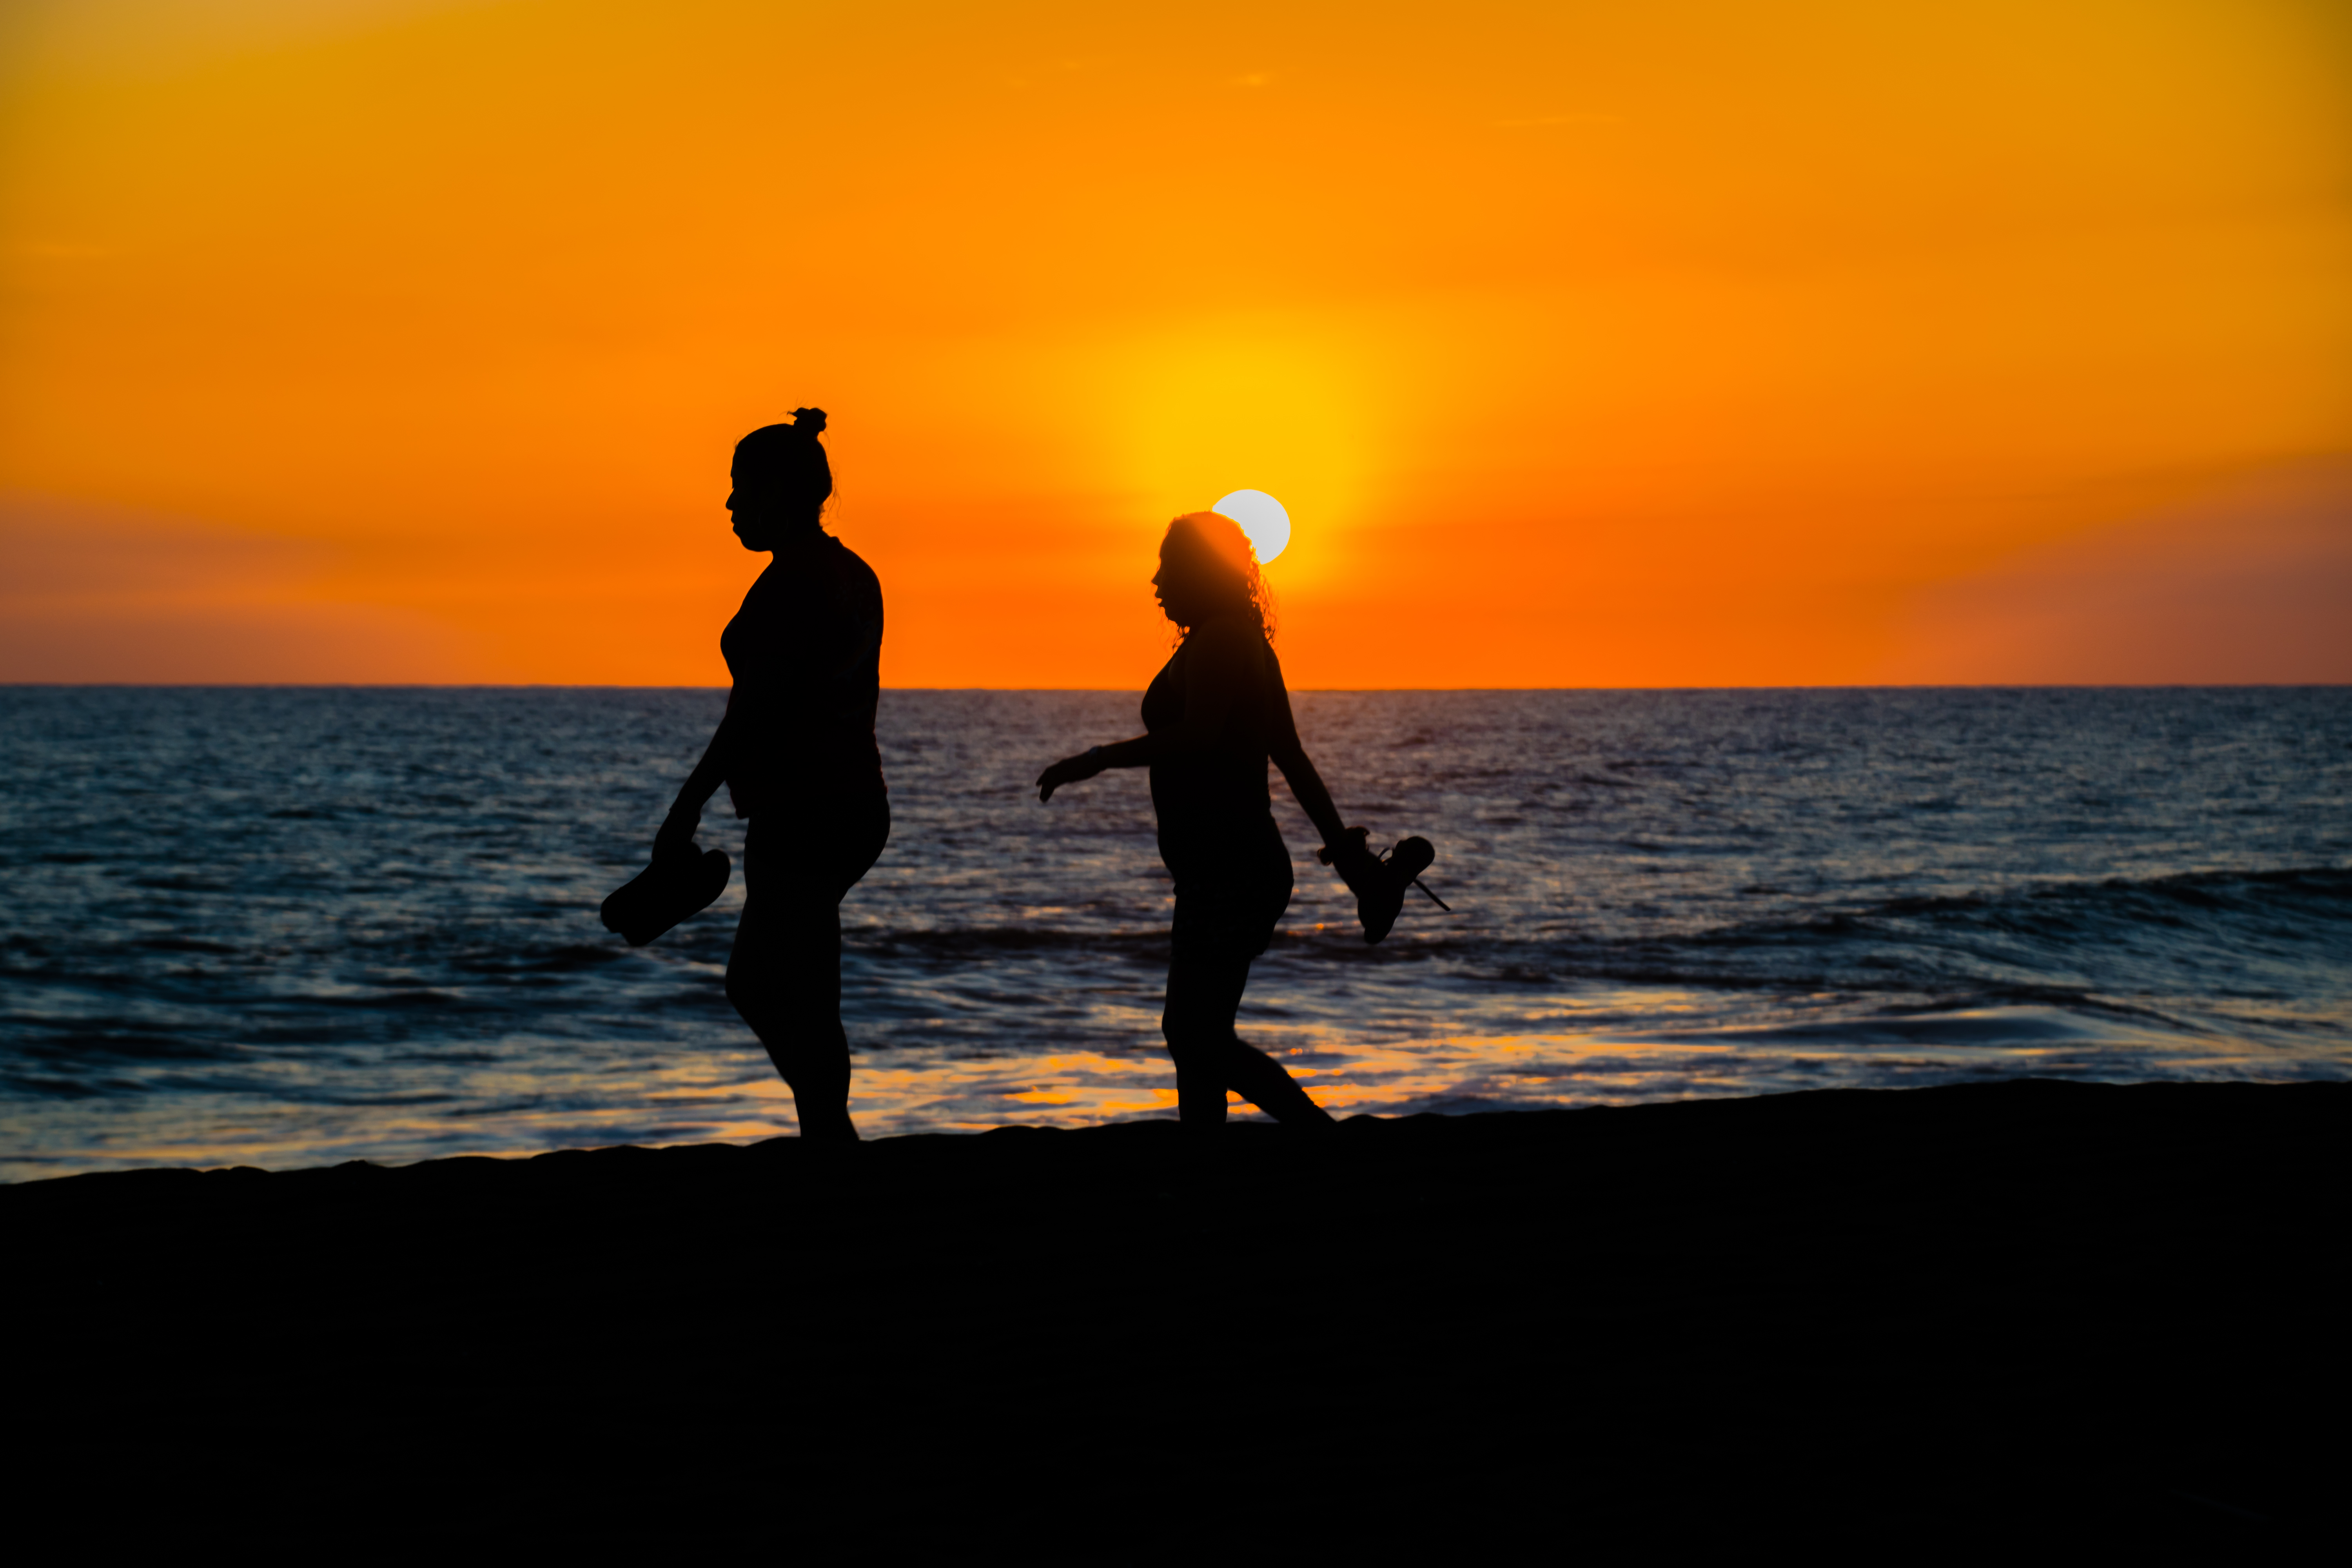 Women at Sunset - Free Stock Photo - Easy Download